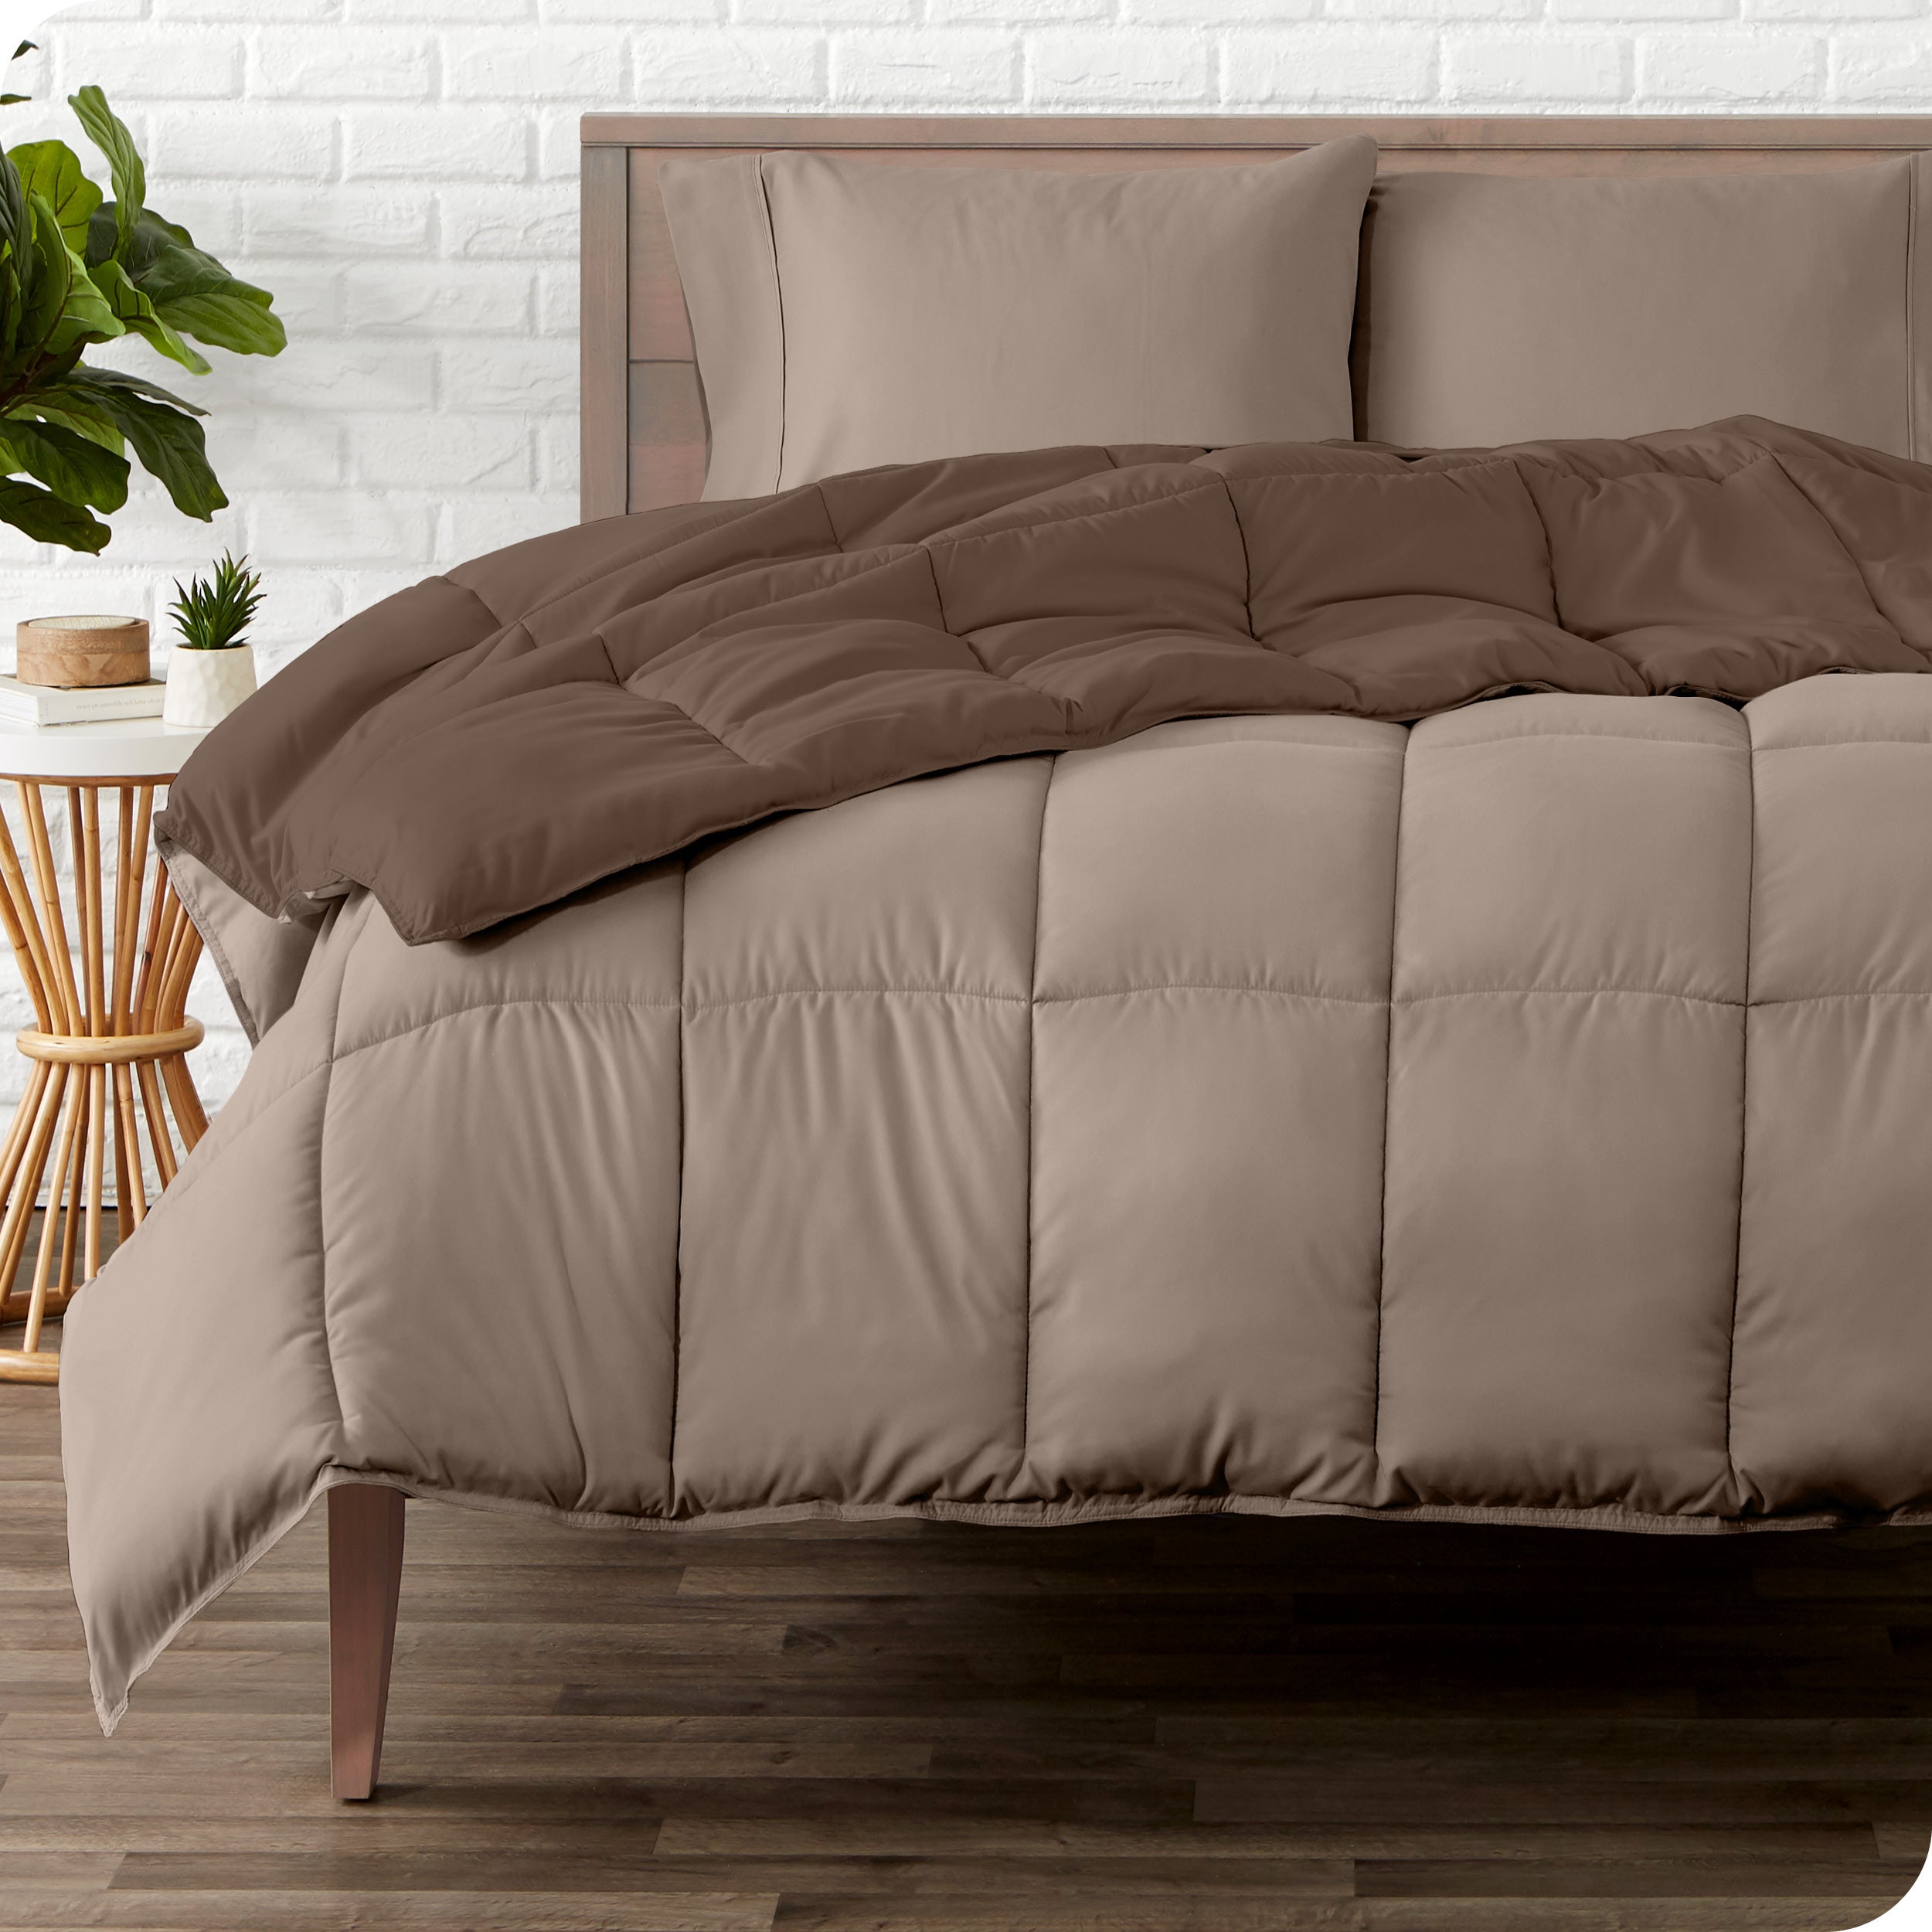 A wooden bed frame with a reversible comforter and sheet set on the mattress